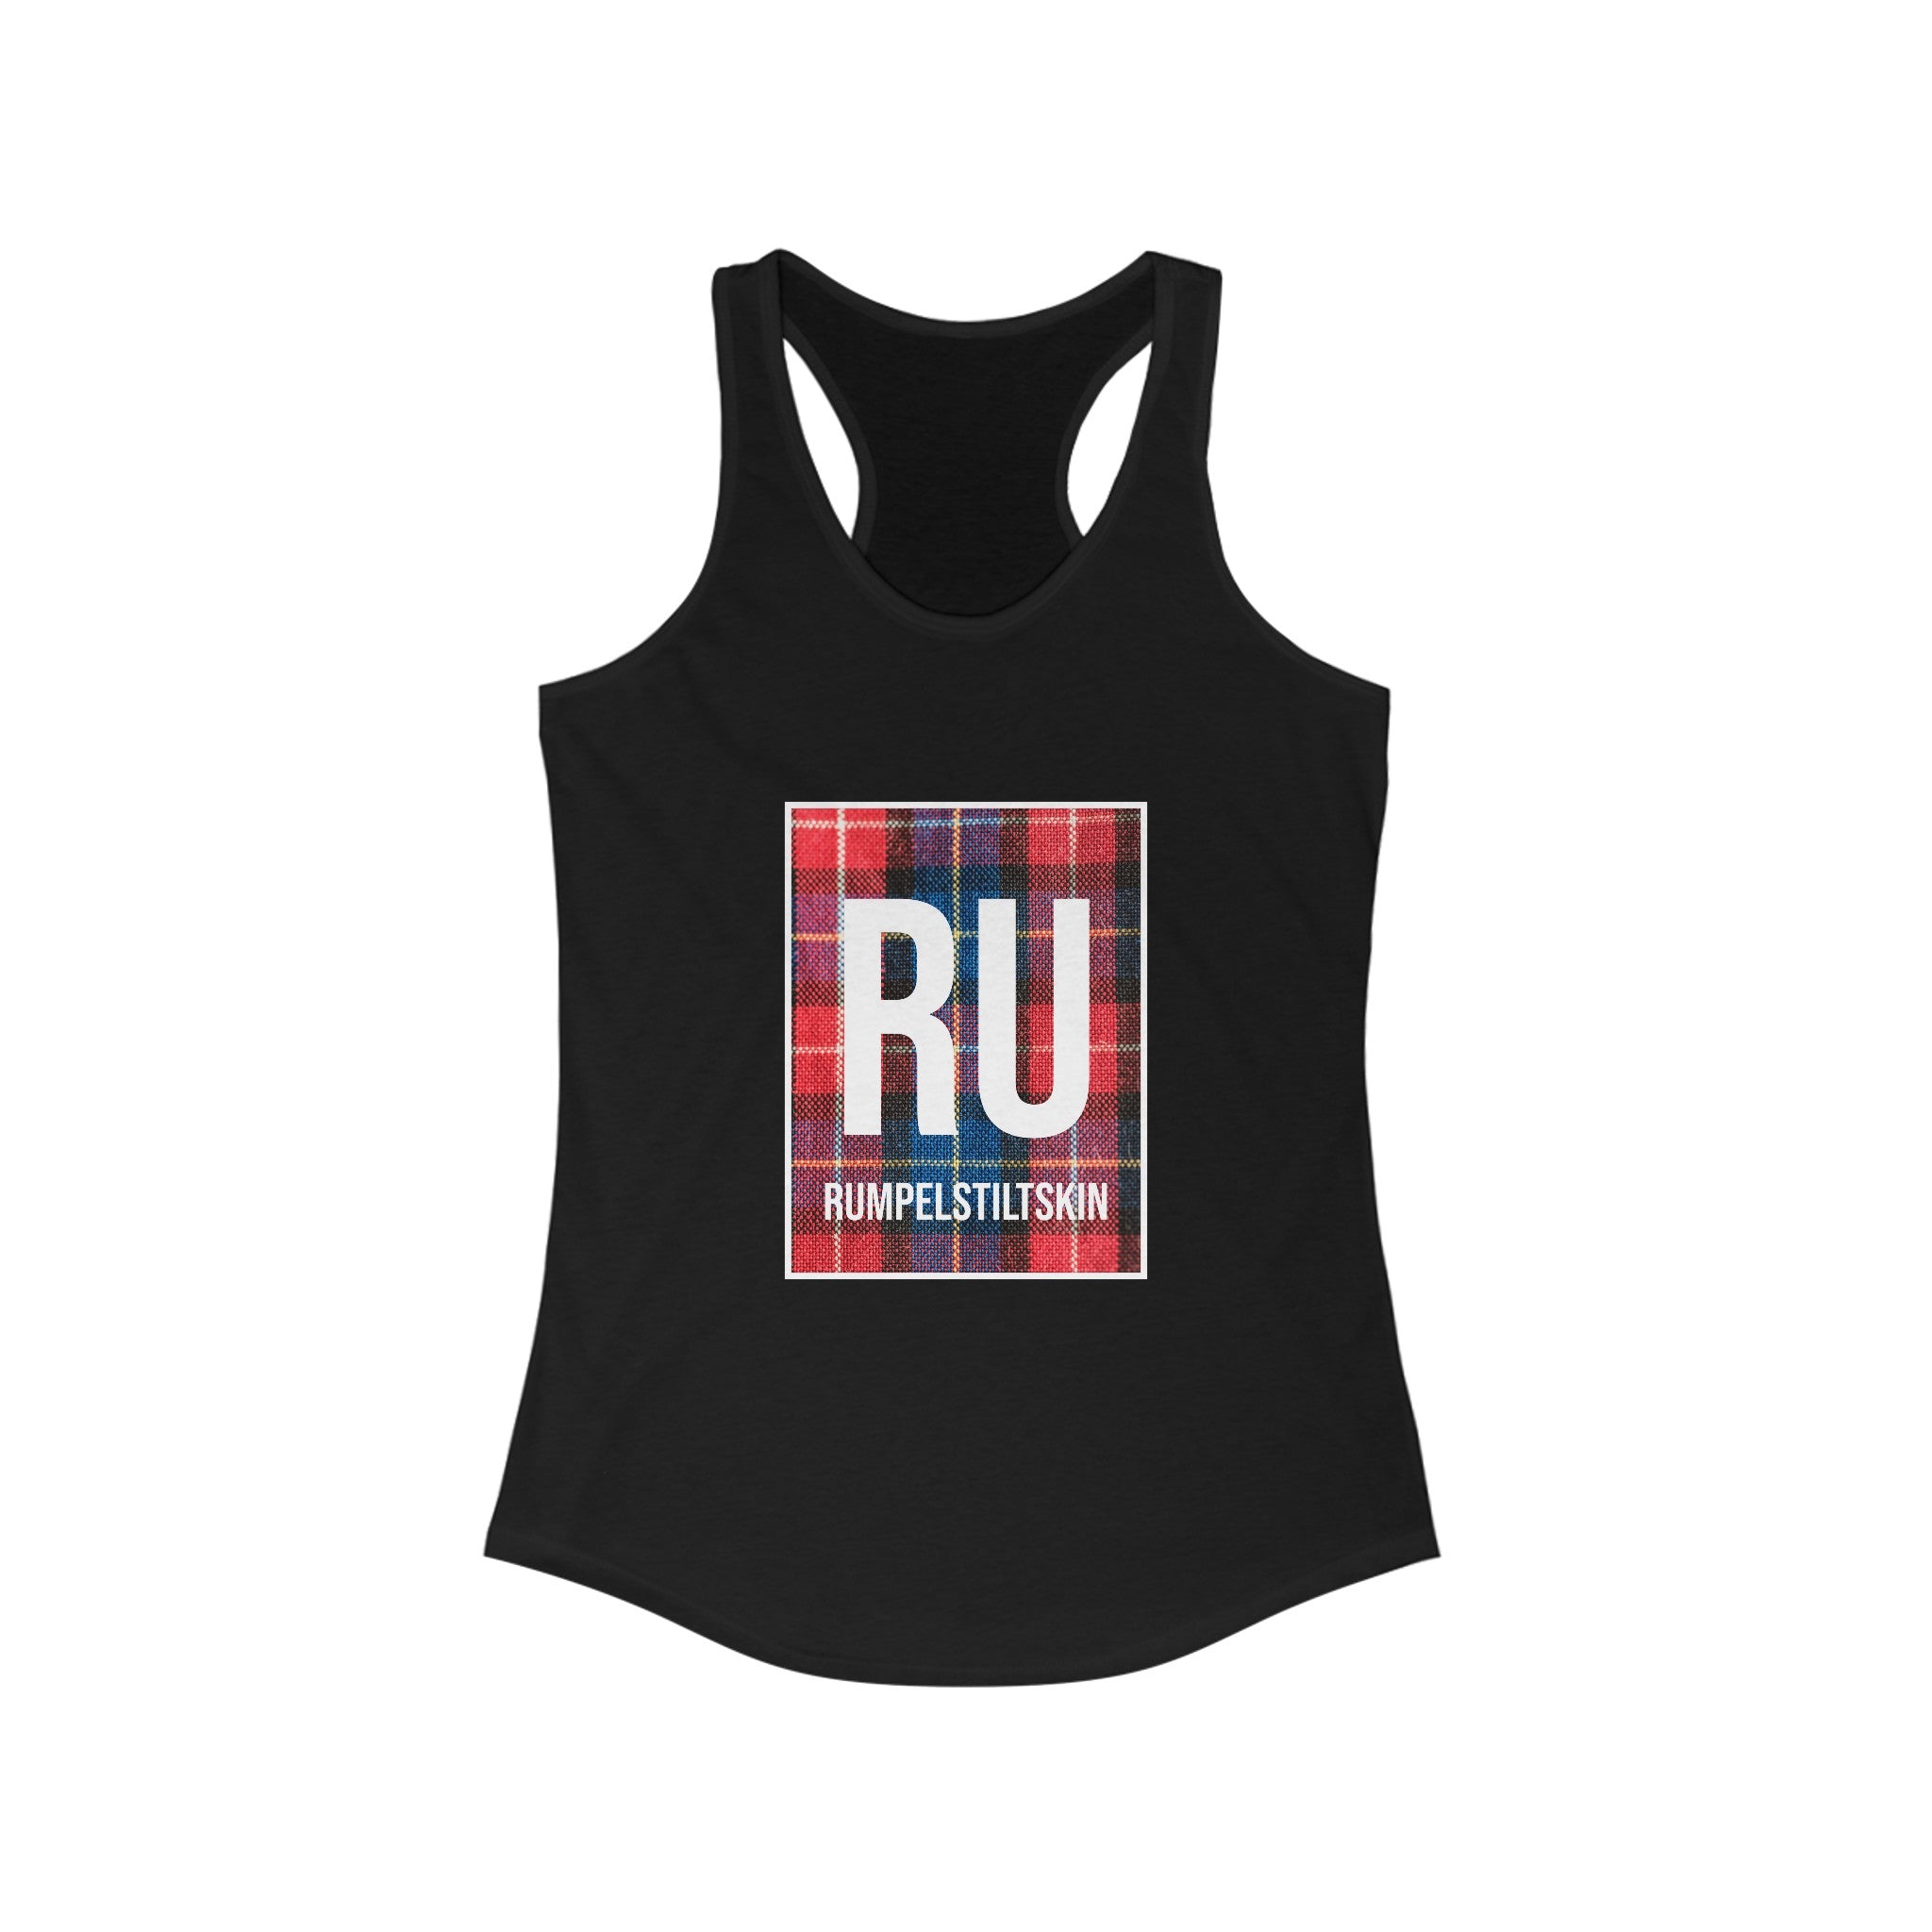 RU - Women's Racerback Tank: Stylish workout black tank top with a plaid block design featuring the large letters "RU" and the word "Rumpelstiltskin" beneath them. Lightweight fabric ensures maximum comfort.